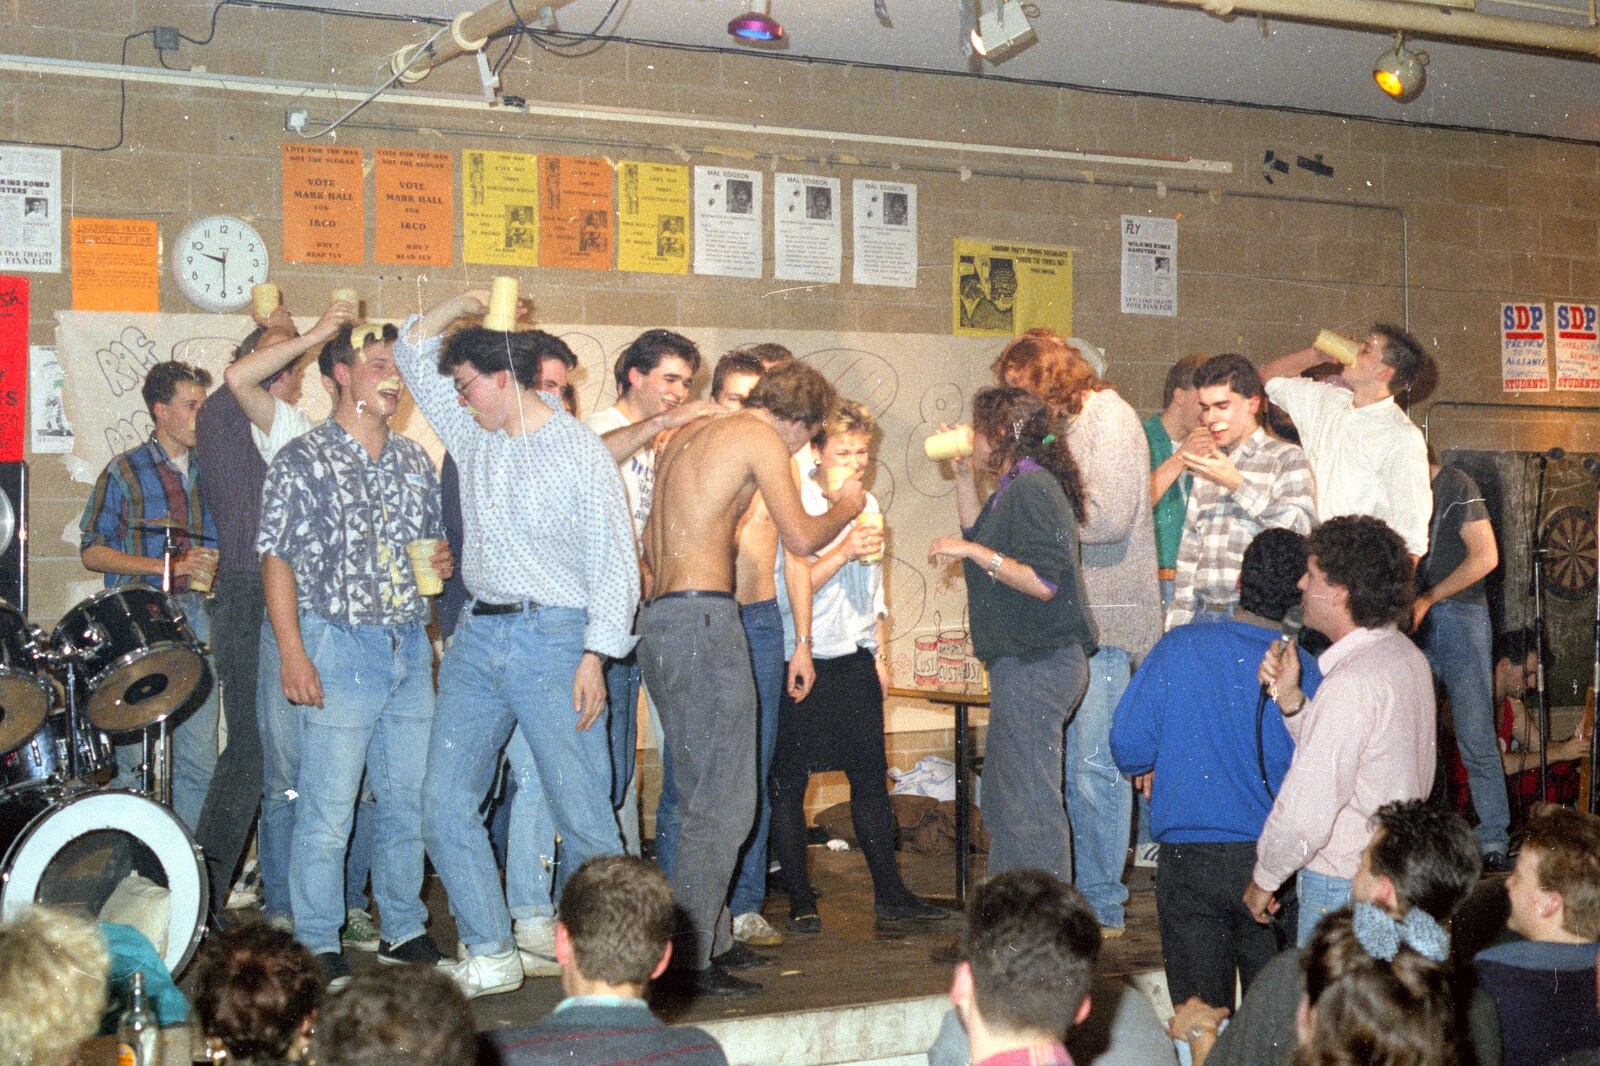 Tim Collins puts his mostly-empty glass on his head from Uni: The Pirate RAG Review, PPSU Students' Union, Plymouth - 11th February 1987